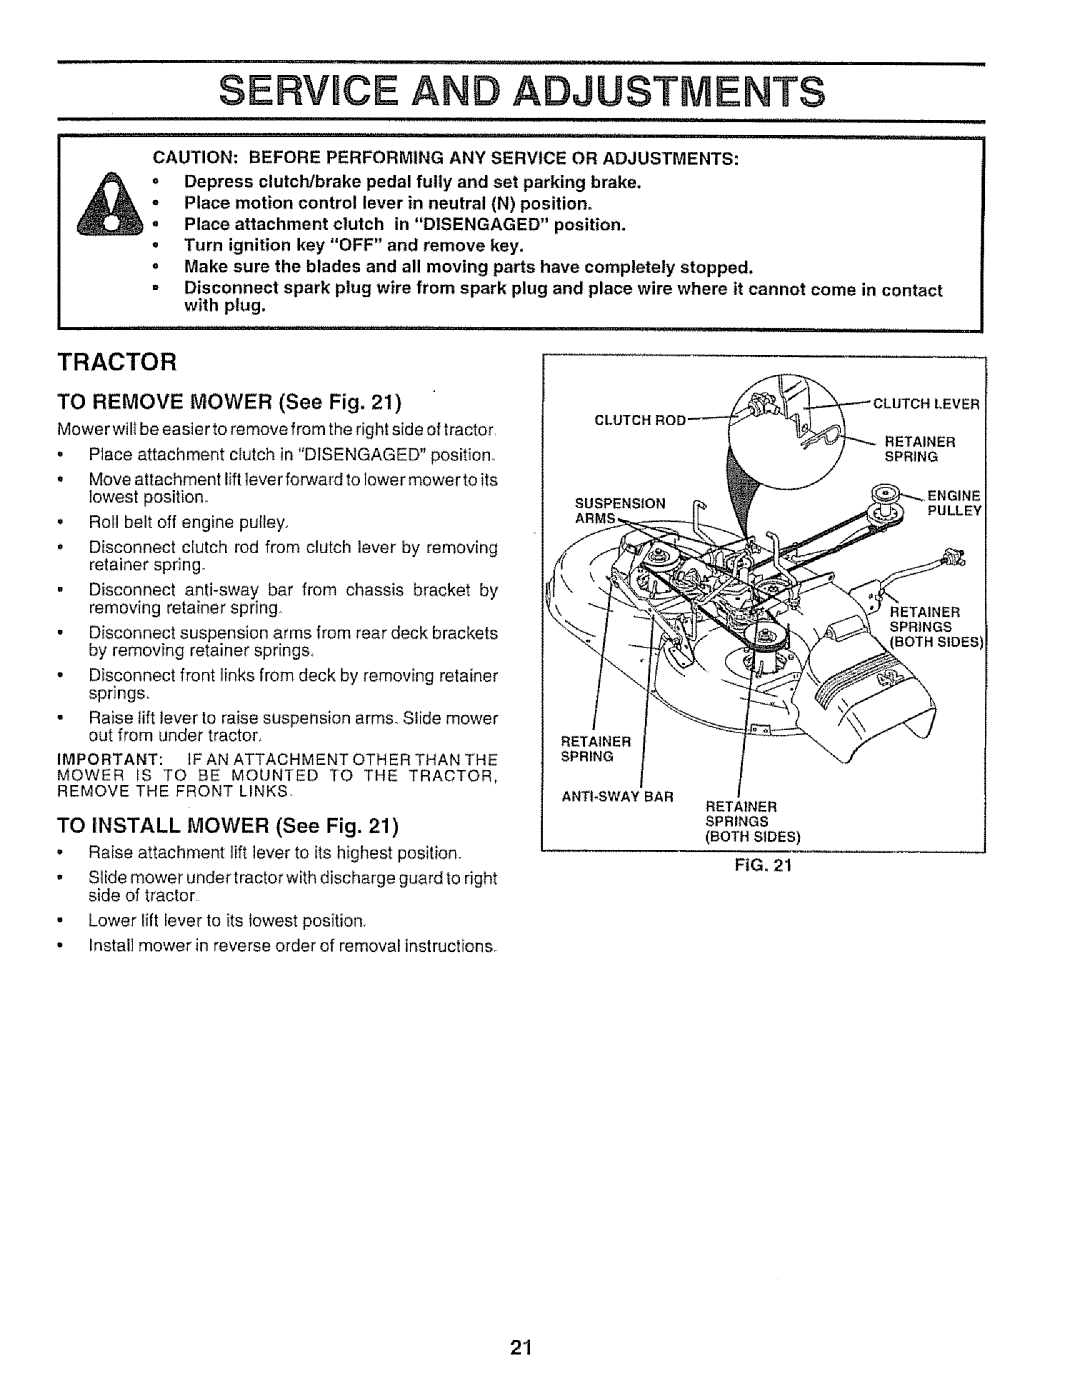 Sears 917.25953 owner manual Service And Adjustments, TO REMOVE MOWER See Fig, TO INSTALL MOWER See Fig, Tractor 